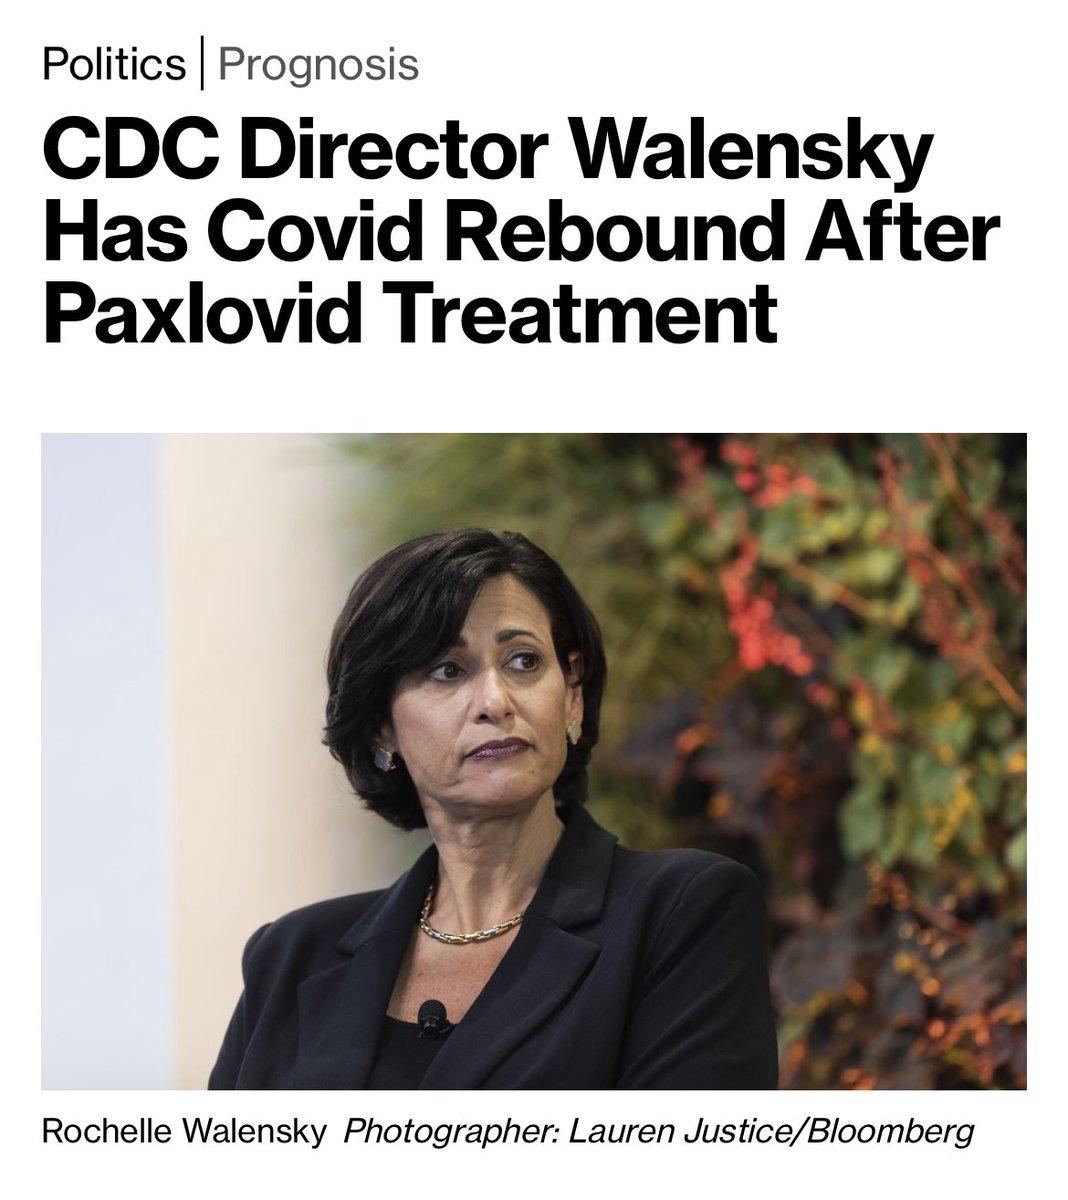 Breaking news: @CDCDirector Walensky has a rebound case of covid following a course of Paxlovid, thus earning her a place in the 2% along with Fauci and Biden